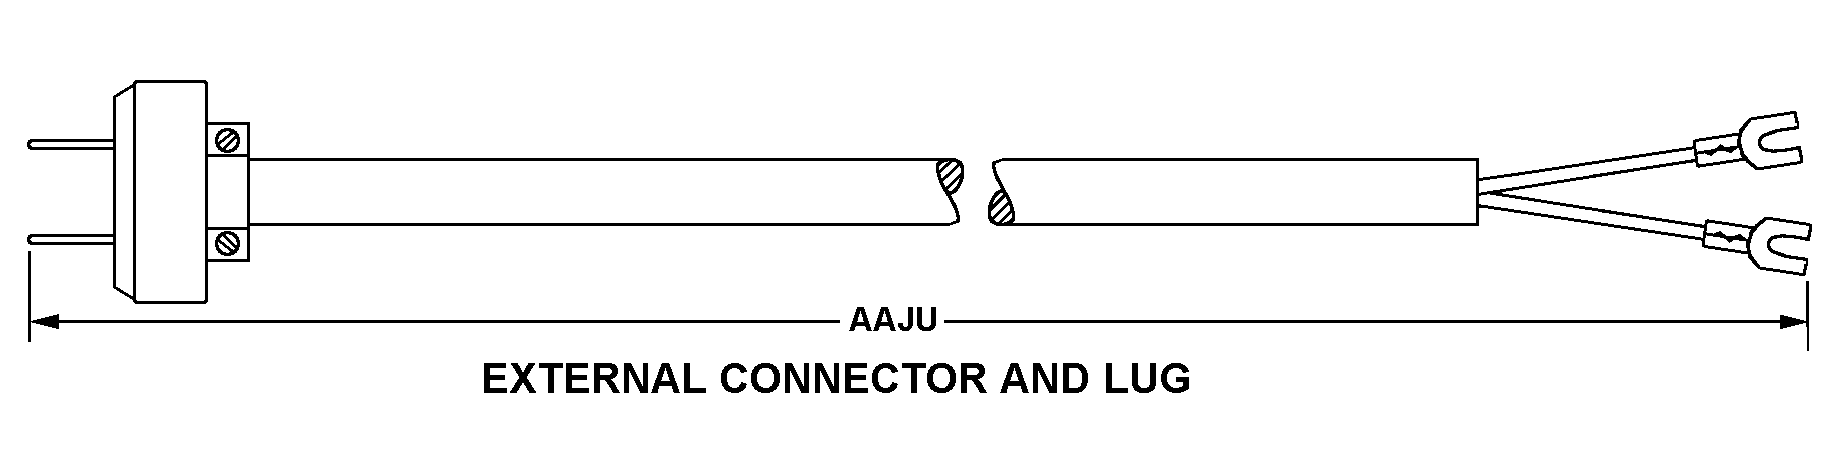 EXTERNAL CONNECTOR AND LUG style nsn 6150-01-412-7788